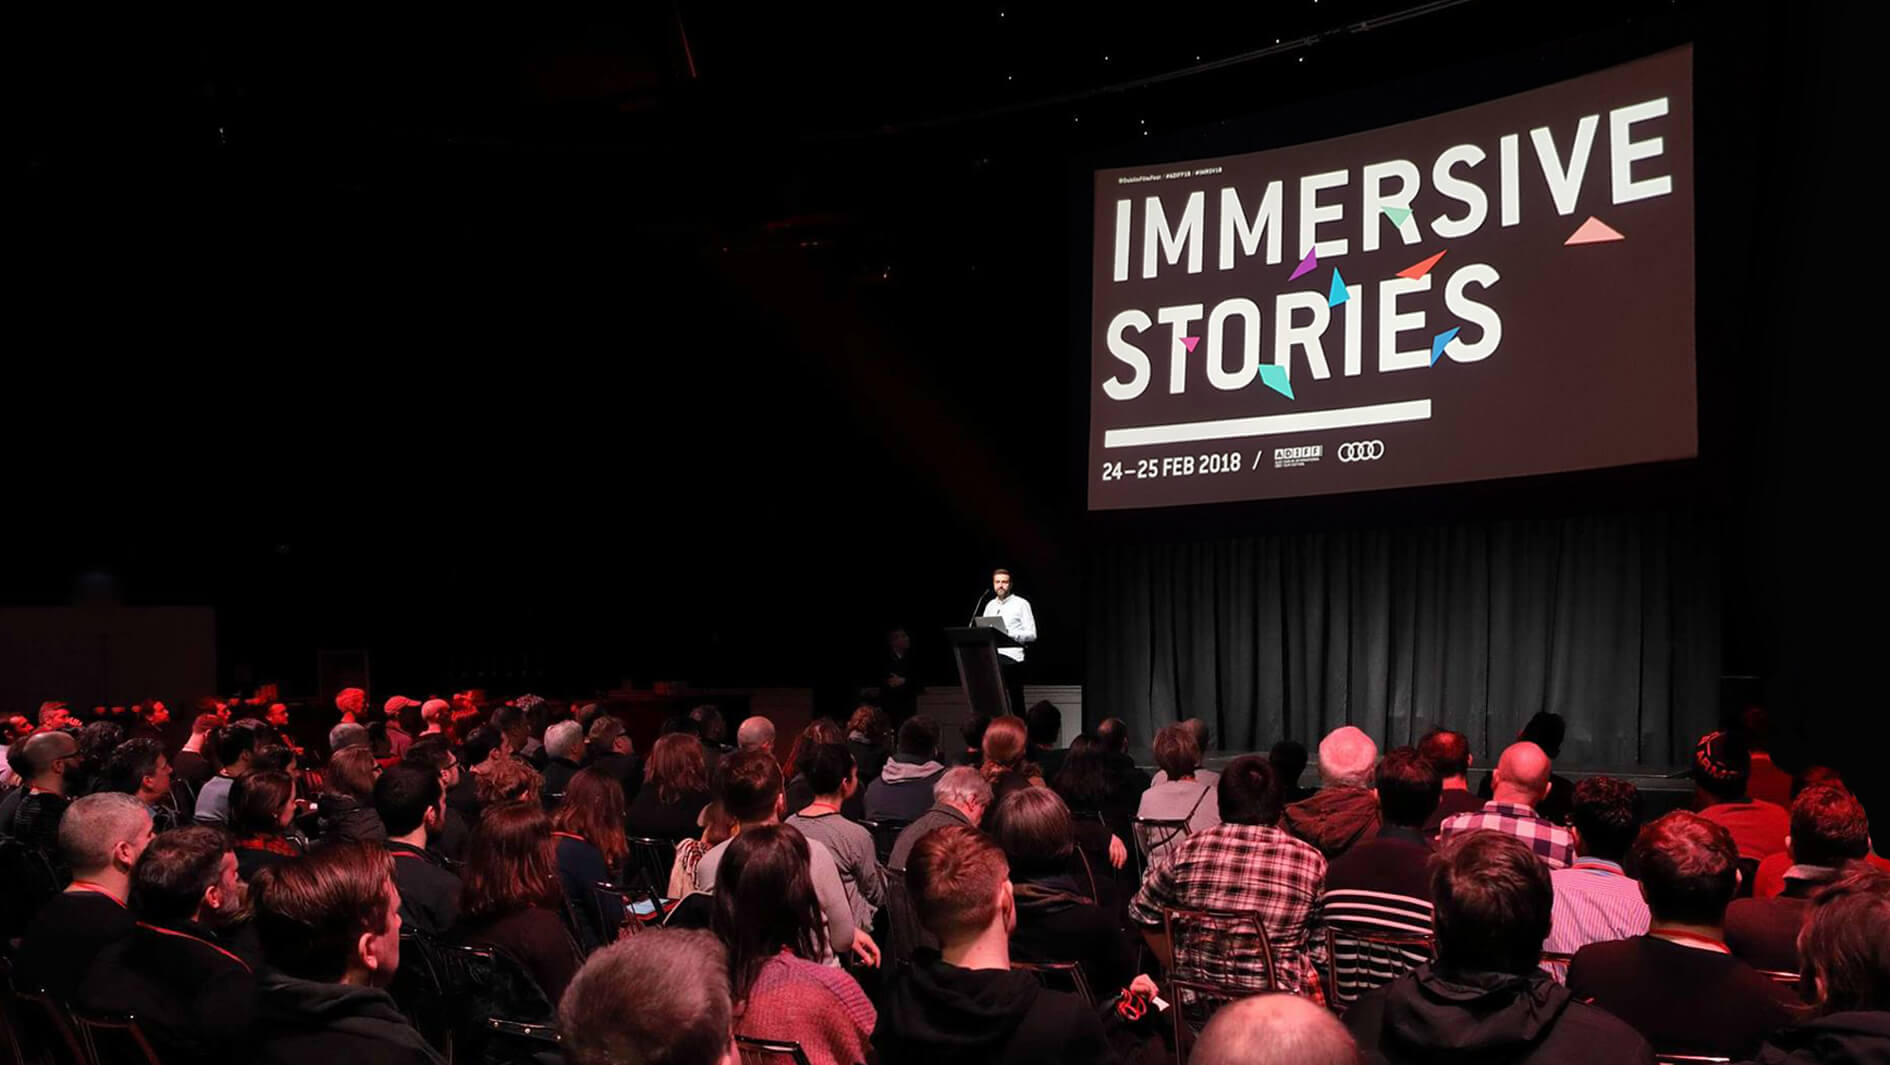 DIFF / Immersive Stories event